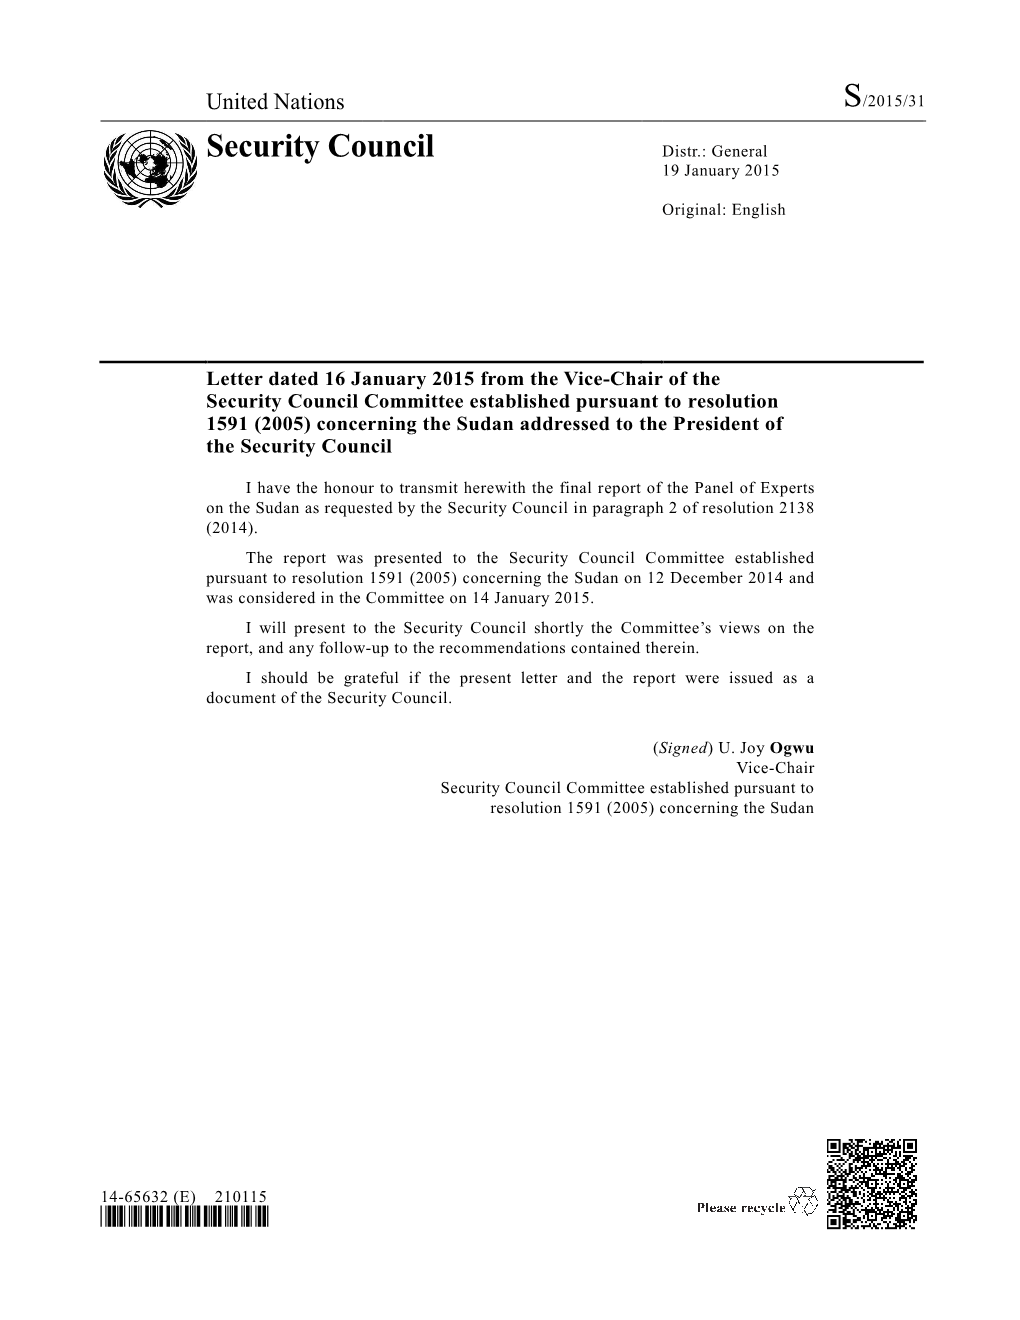 Established Pursuant to Resolution 1591 (2005) Concerning the Sudan Addressed to the President of the Security Council